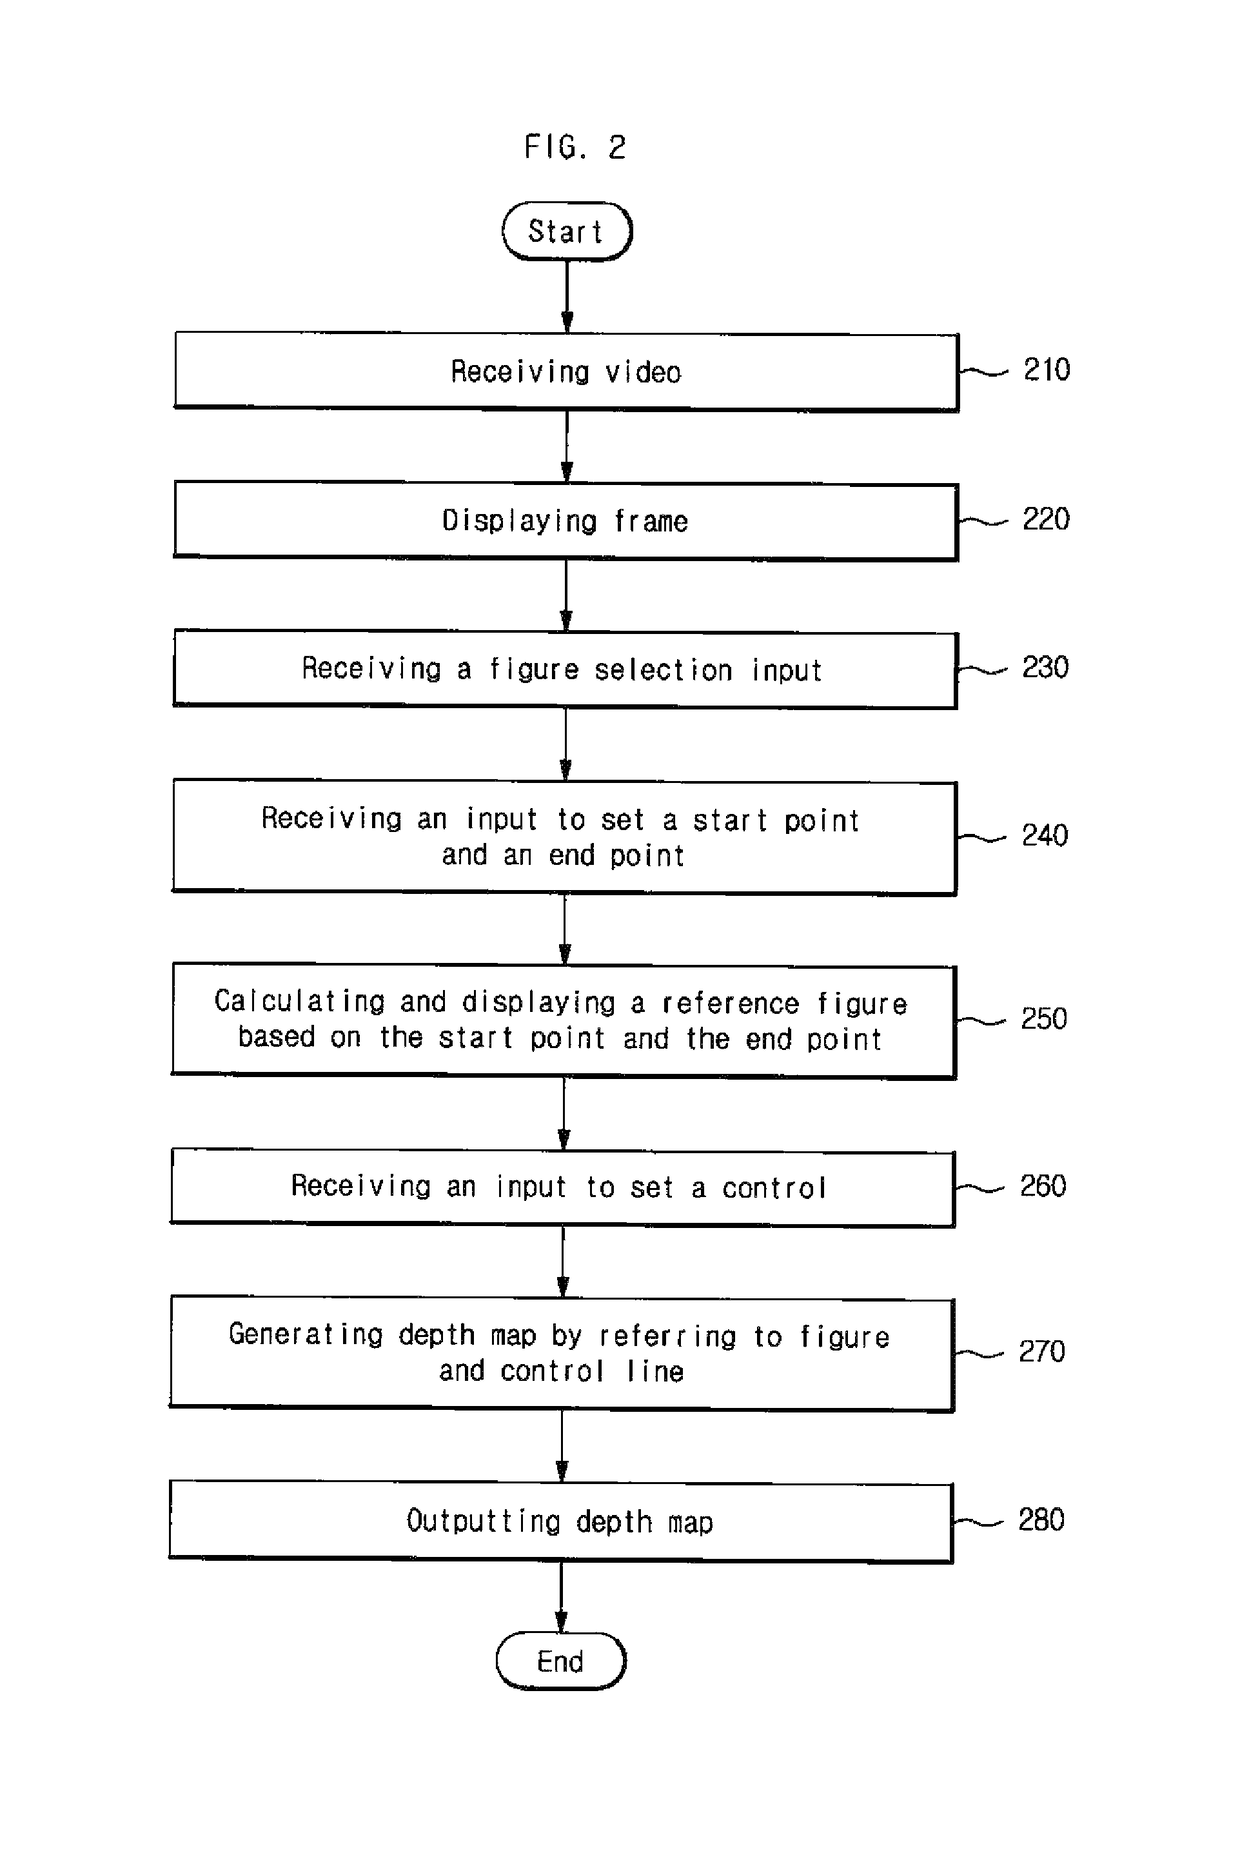 Apparatus and method for generating a depth map